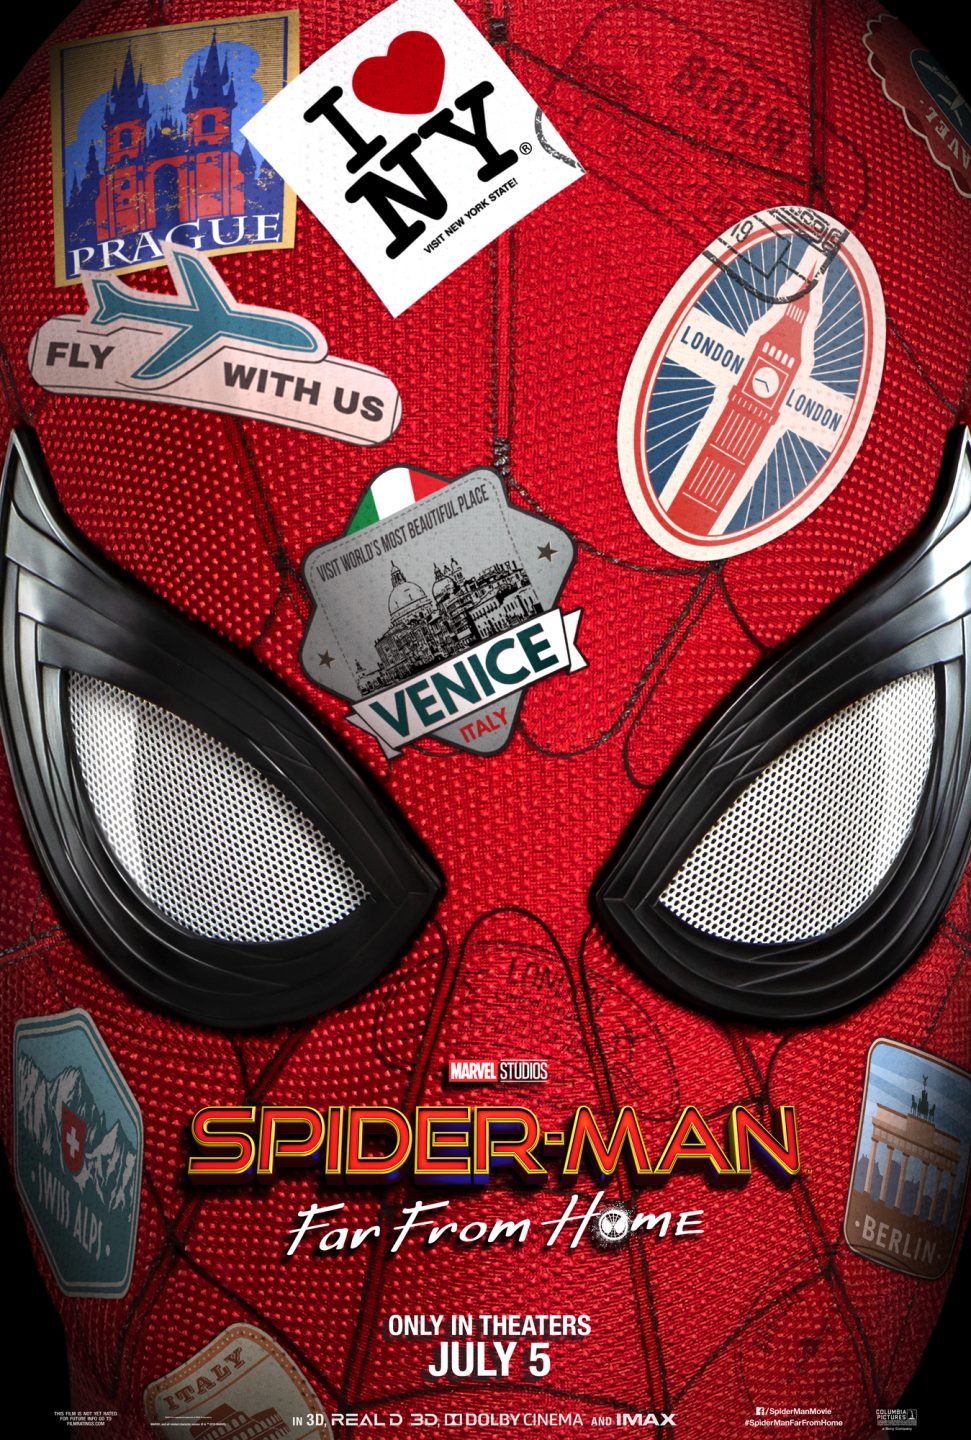 Spider-Man: Far From Home poster (Sony Pictures)